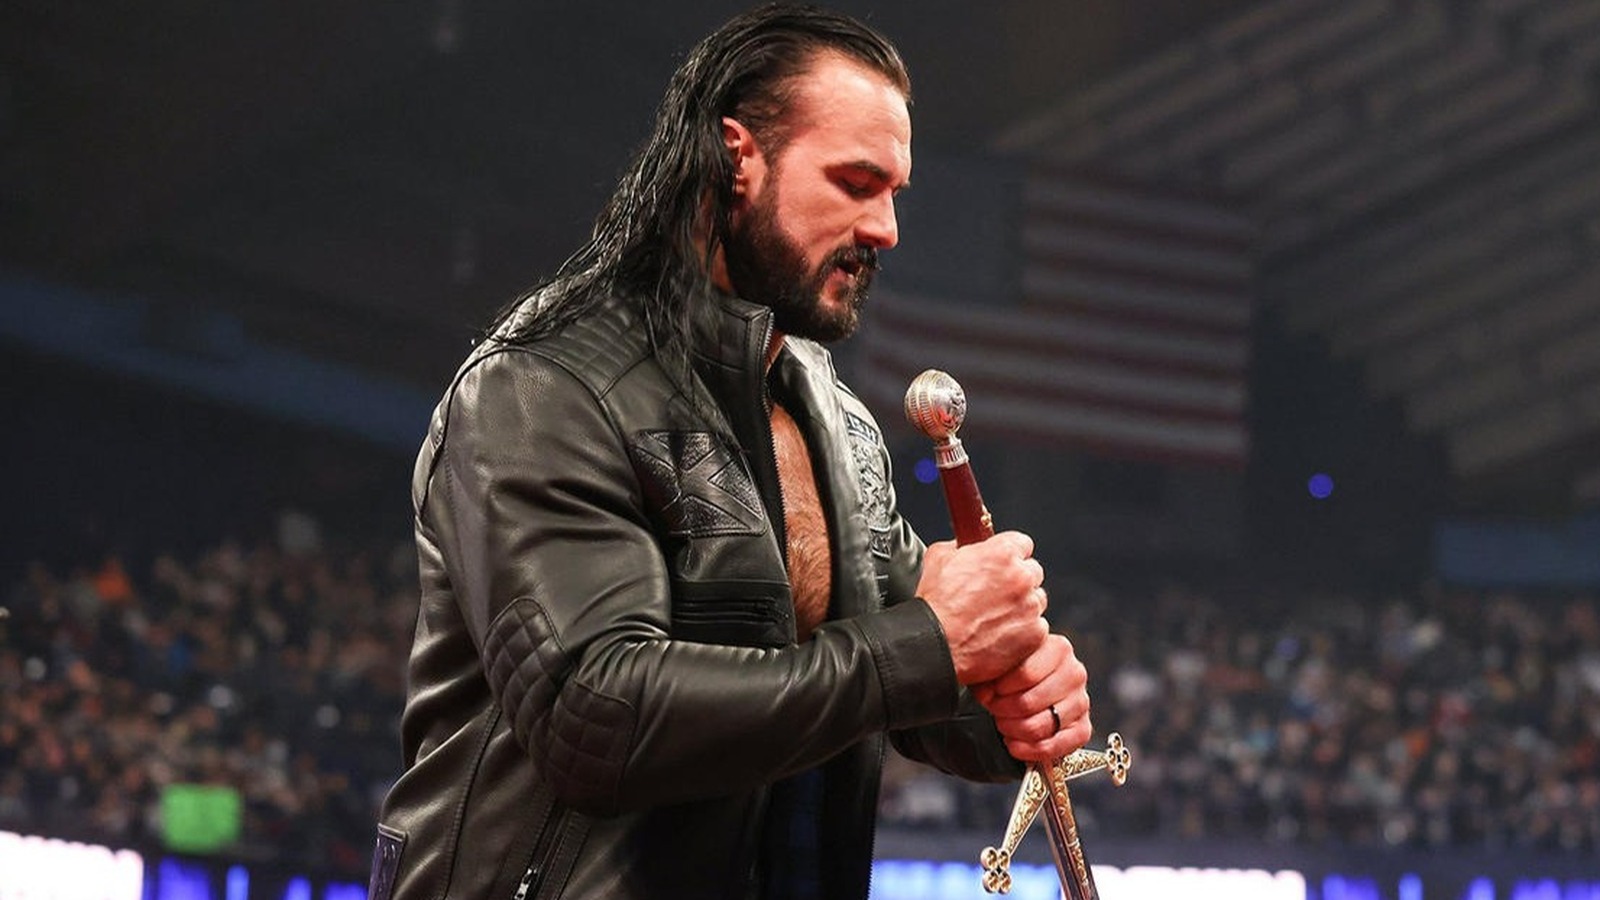 WWE's Drew McIntyre Details The Love-Hate Relationship He Has With His Sword